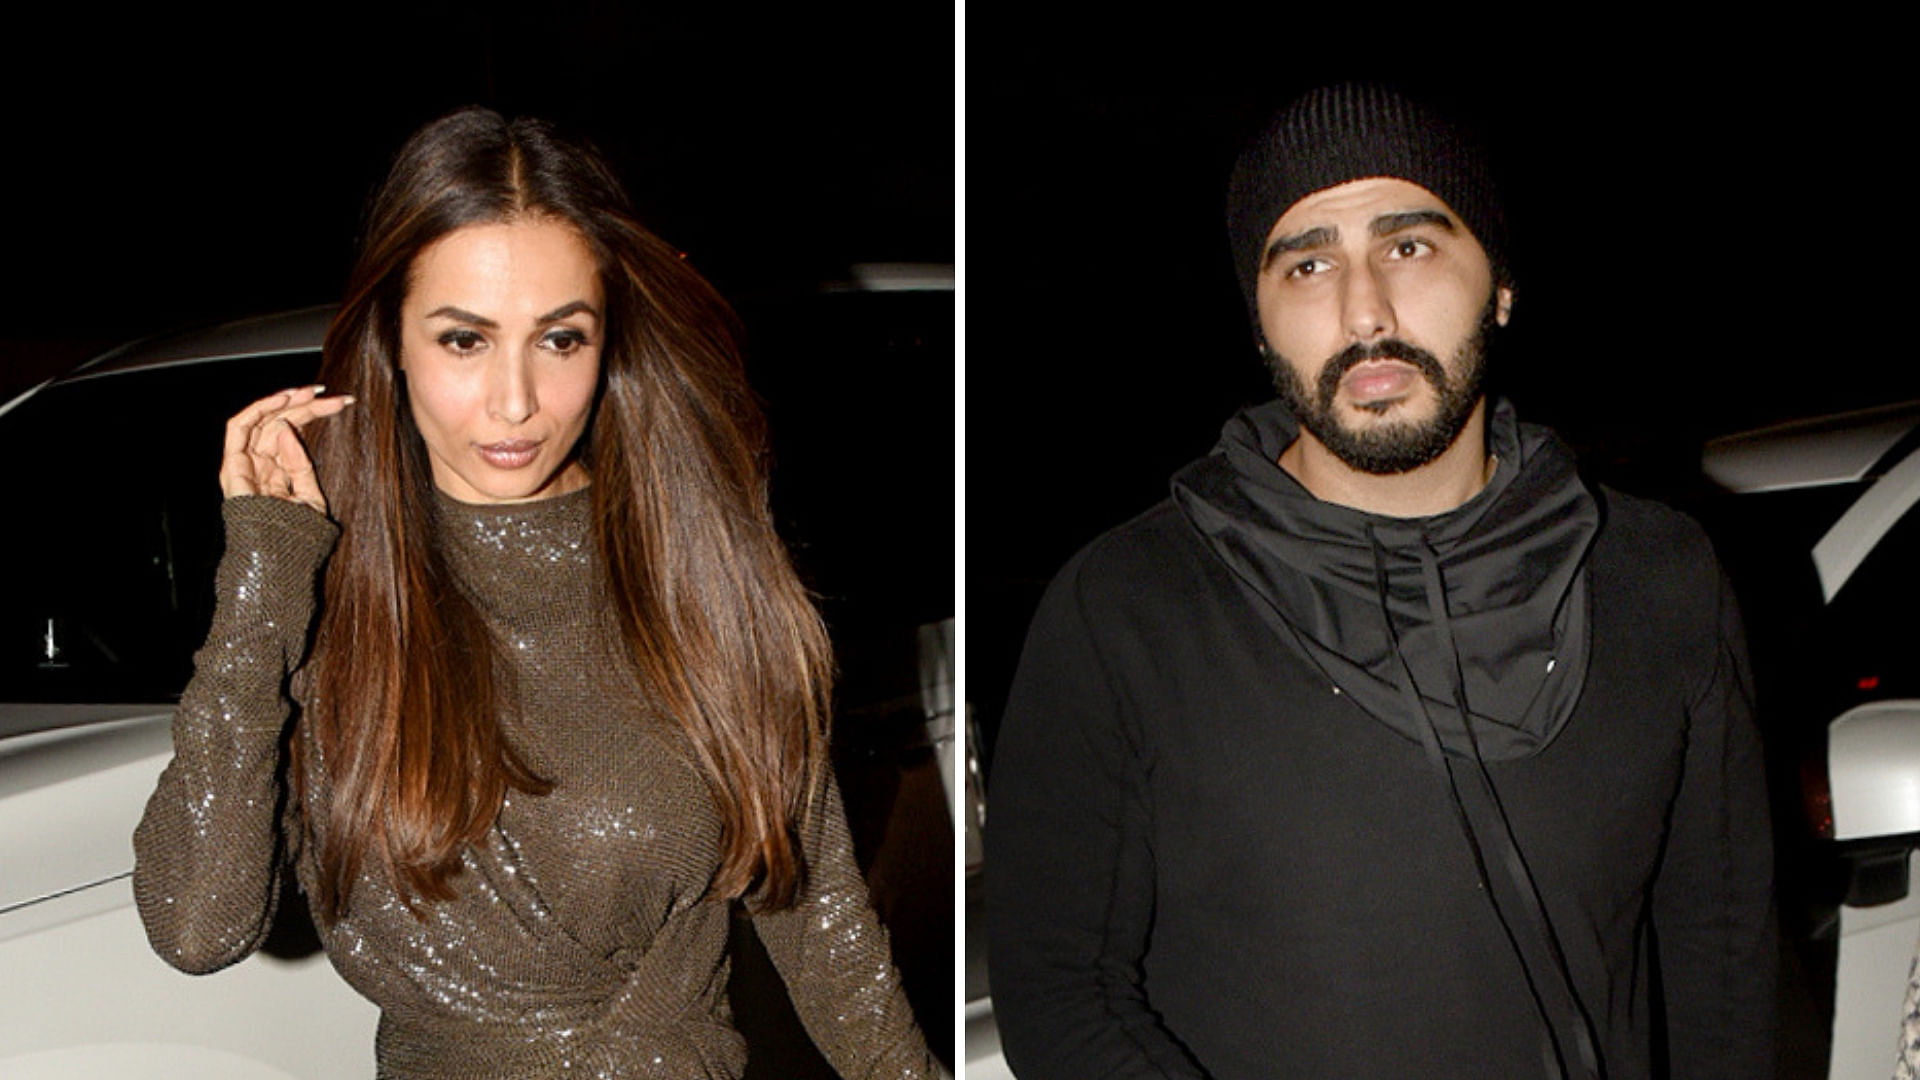 Malaika Arora and Arjun Kapoor brought in the New Year together.